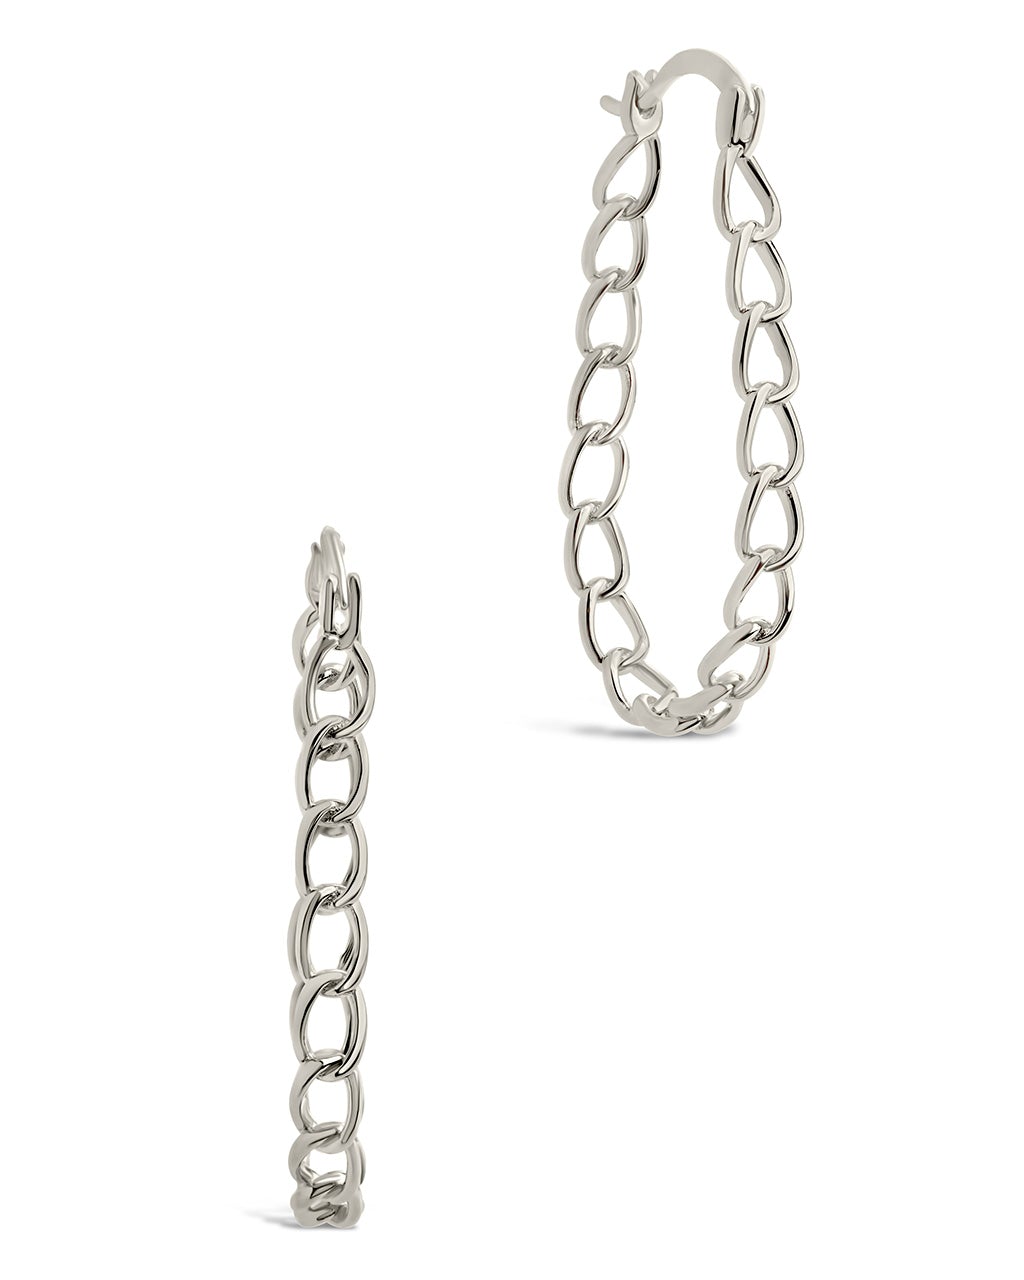 Chain Link Statement Hoops Earring Sterling Forever Silver 